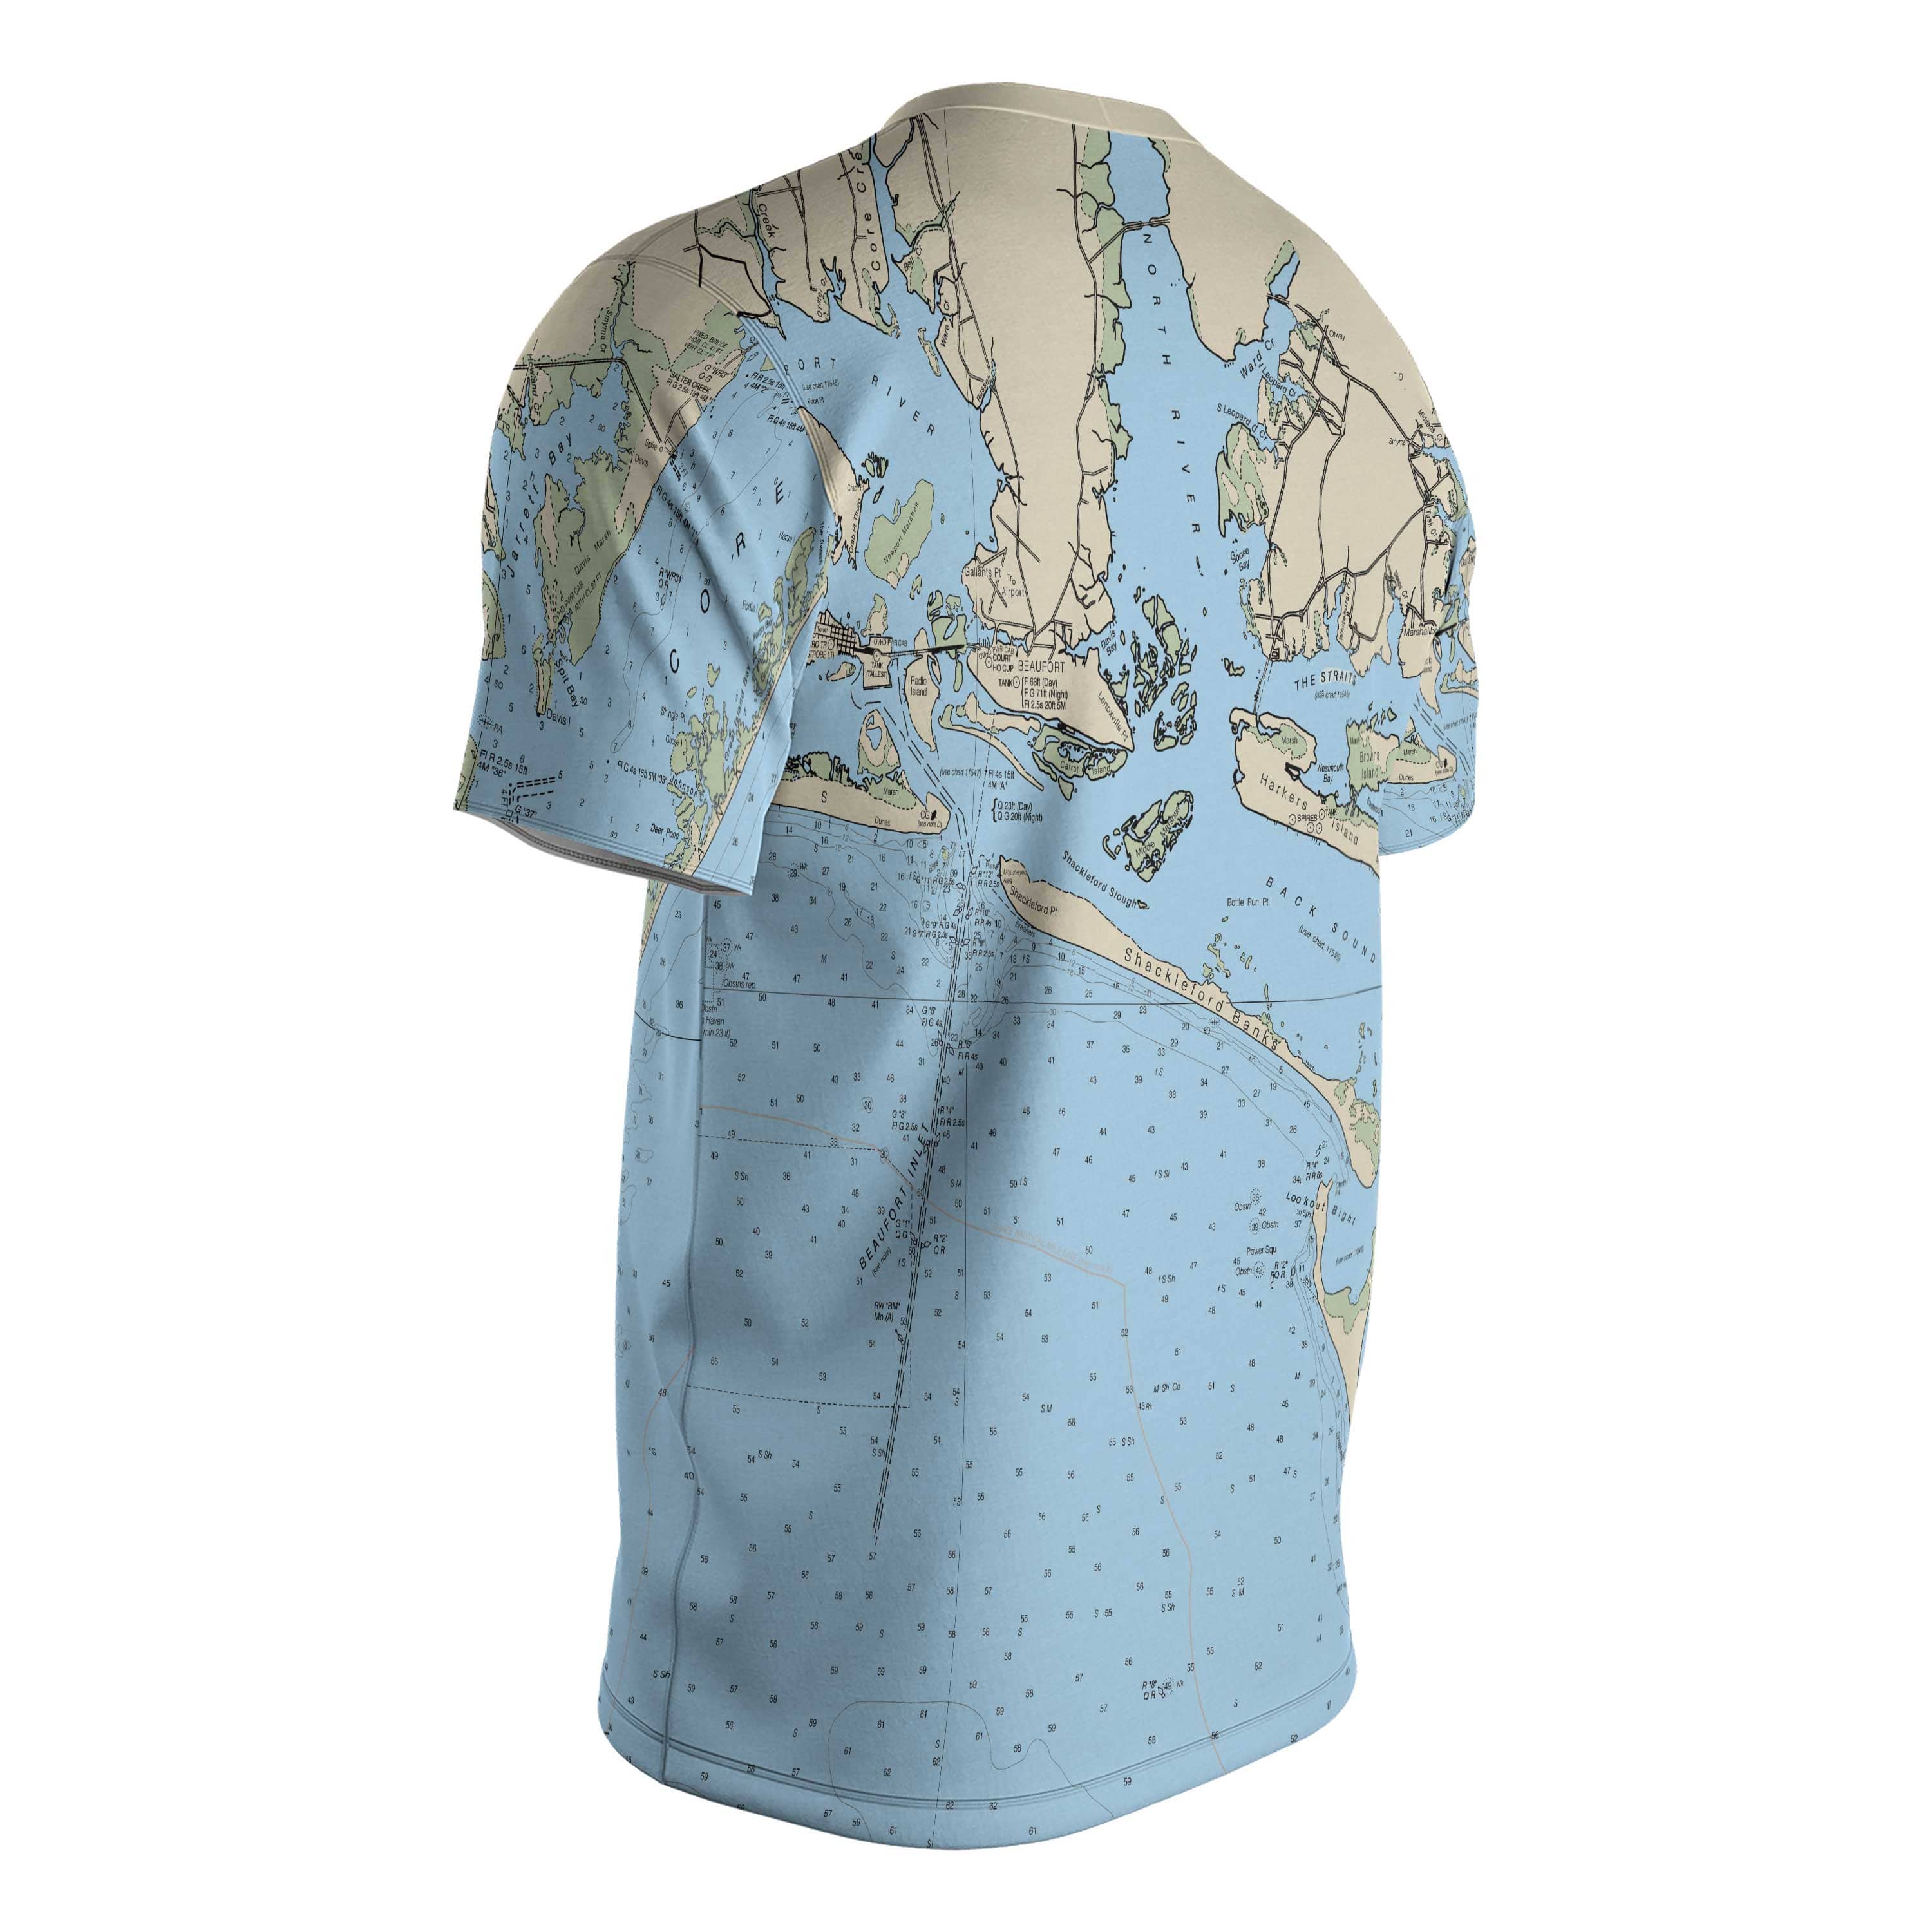 The Beaufort and Cape Lookout Mariner T Shirt